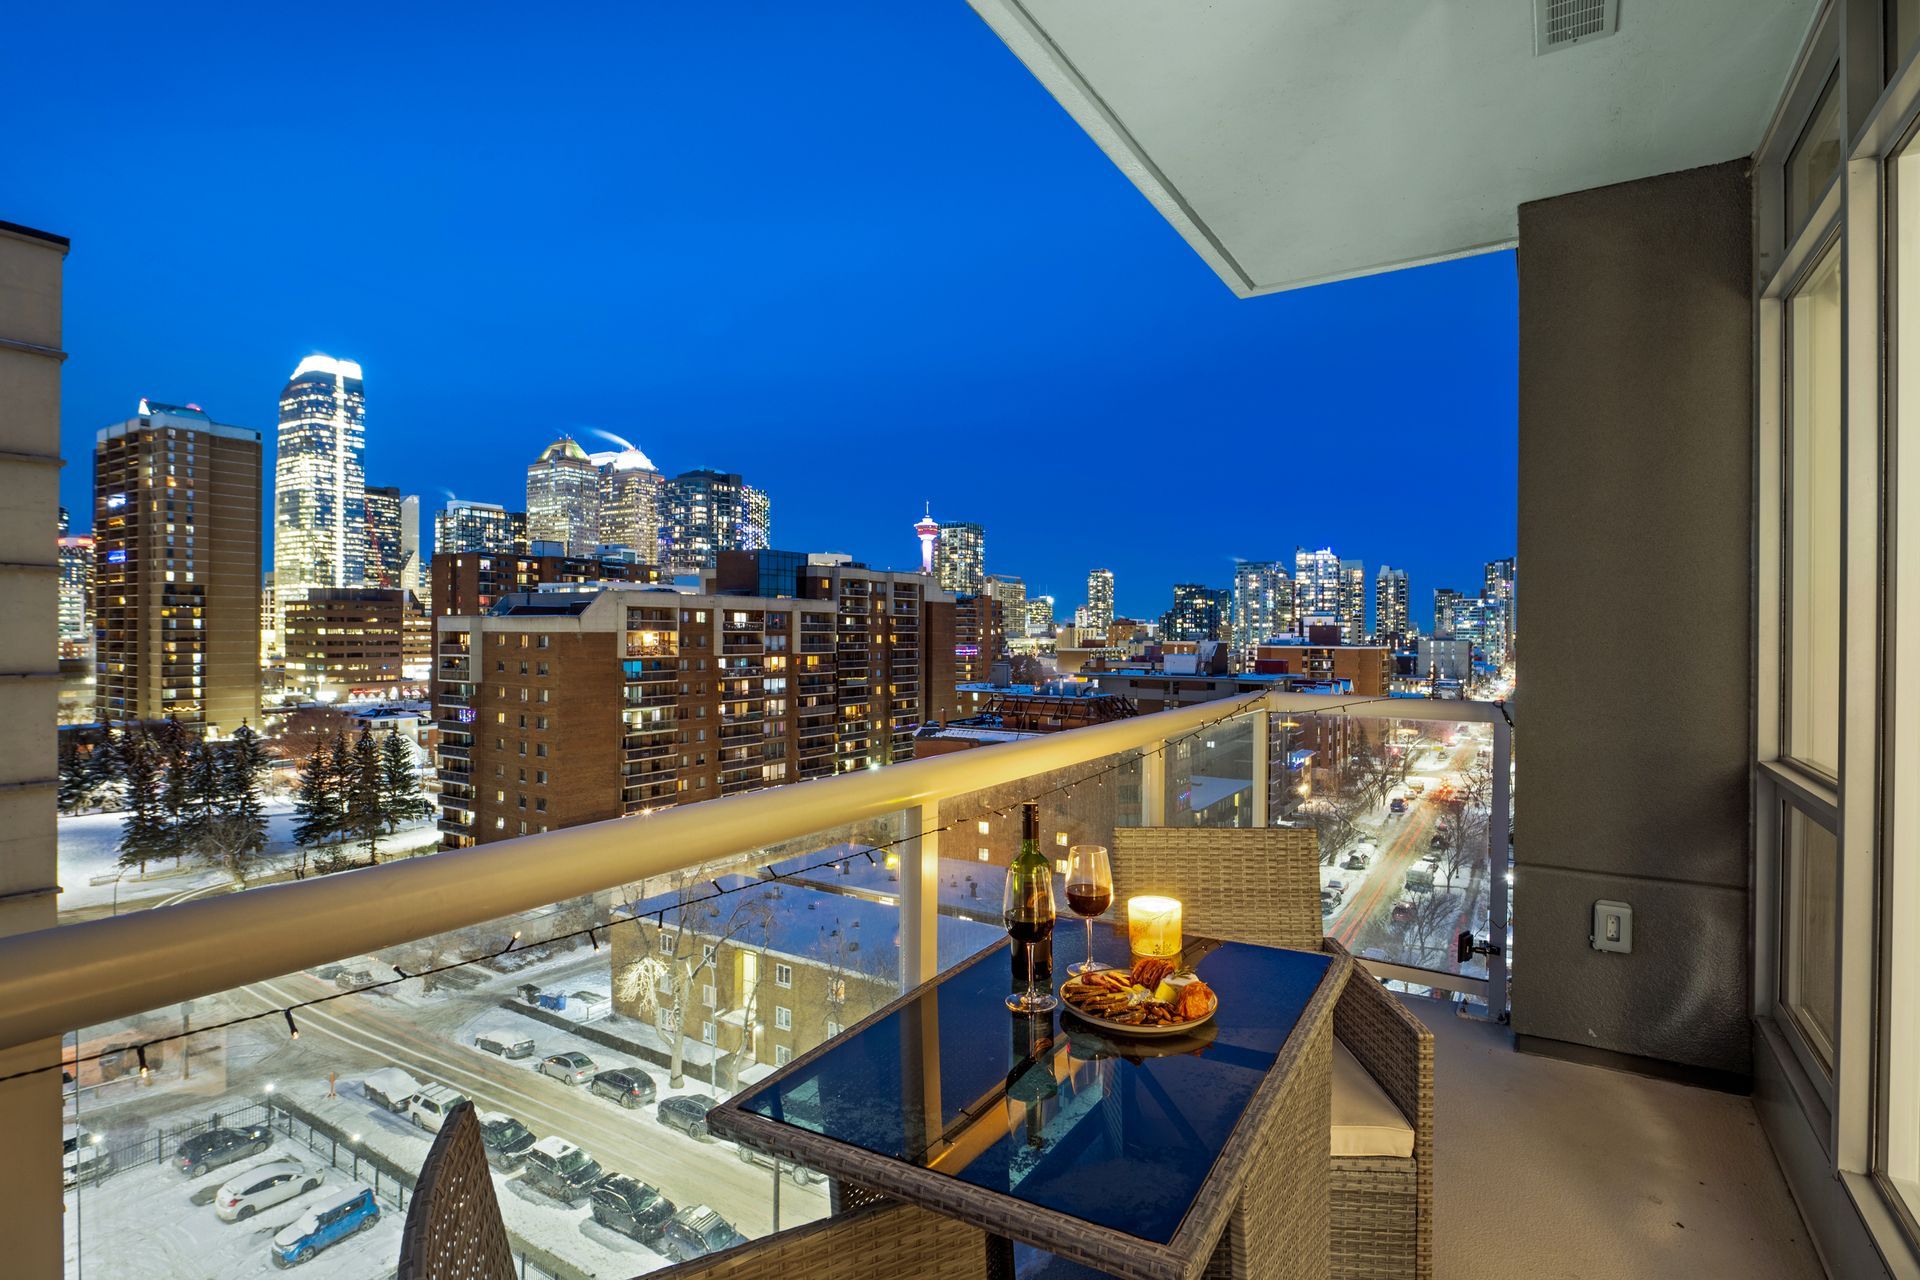 Private balcony of Mr & Mrs. Smith, a Calgary short-term rental hosted by Aisling Baile Property Management.